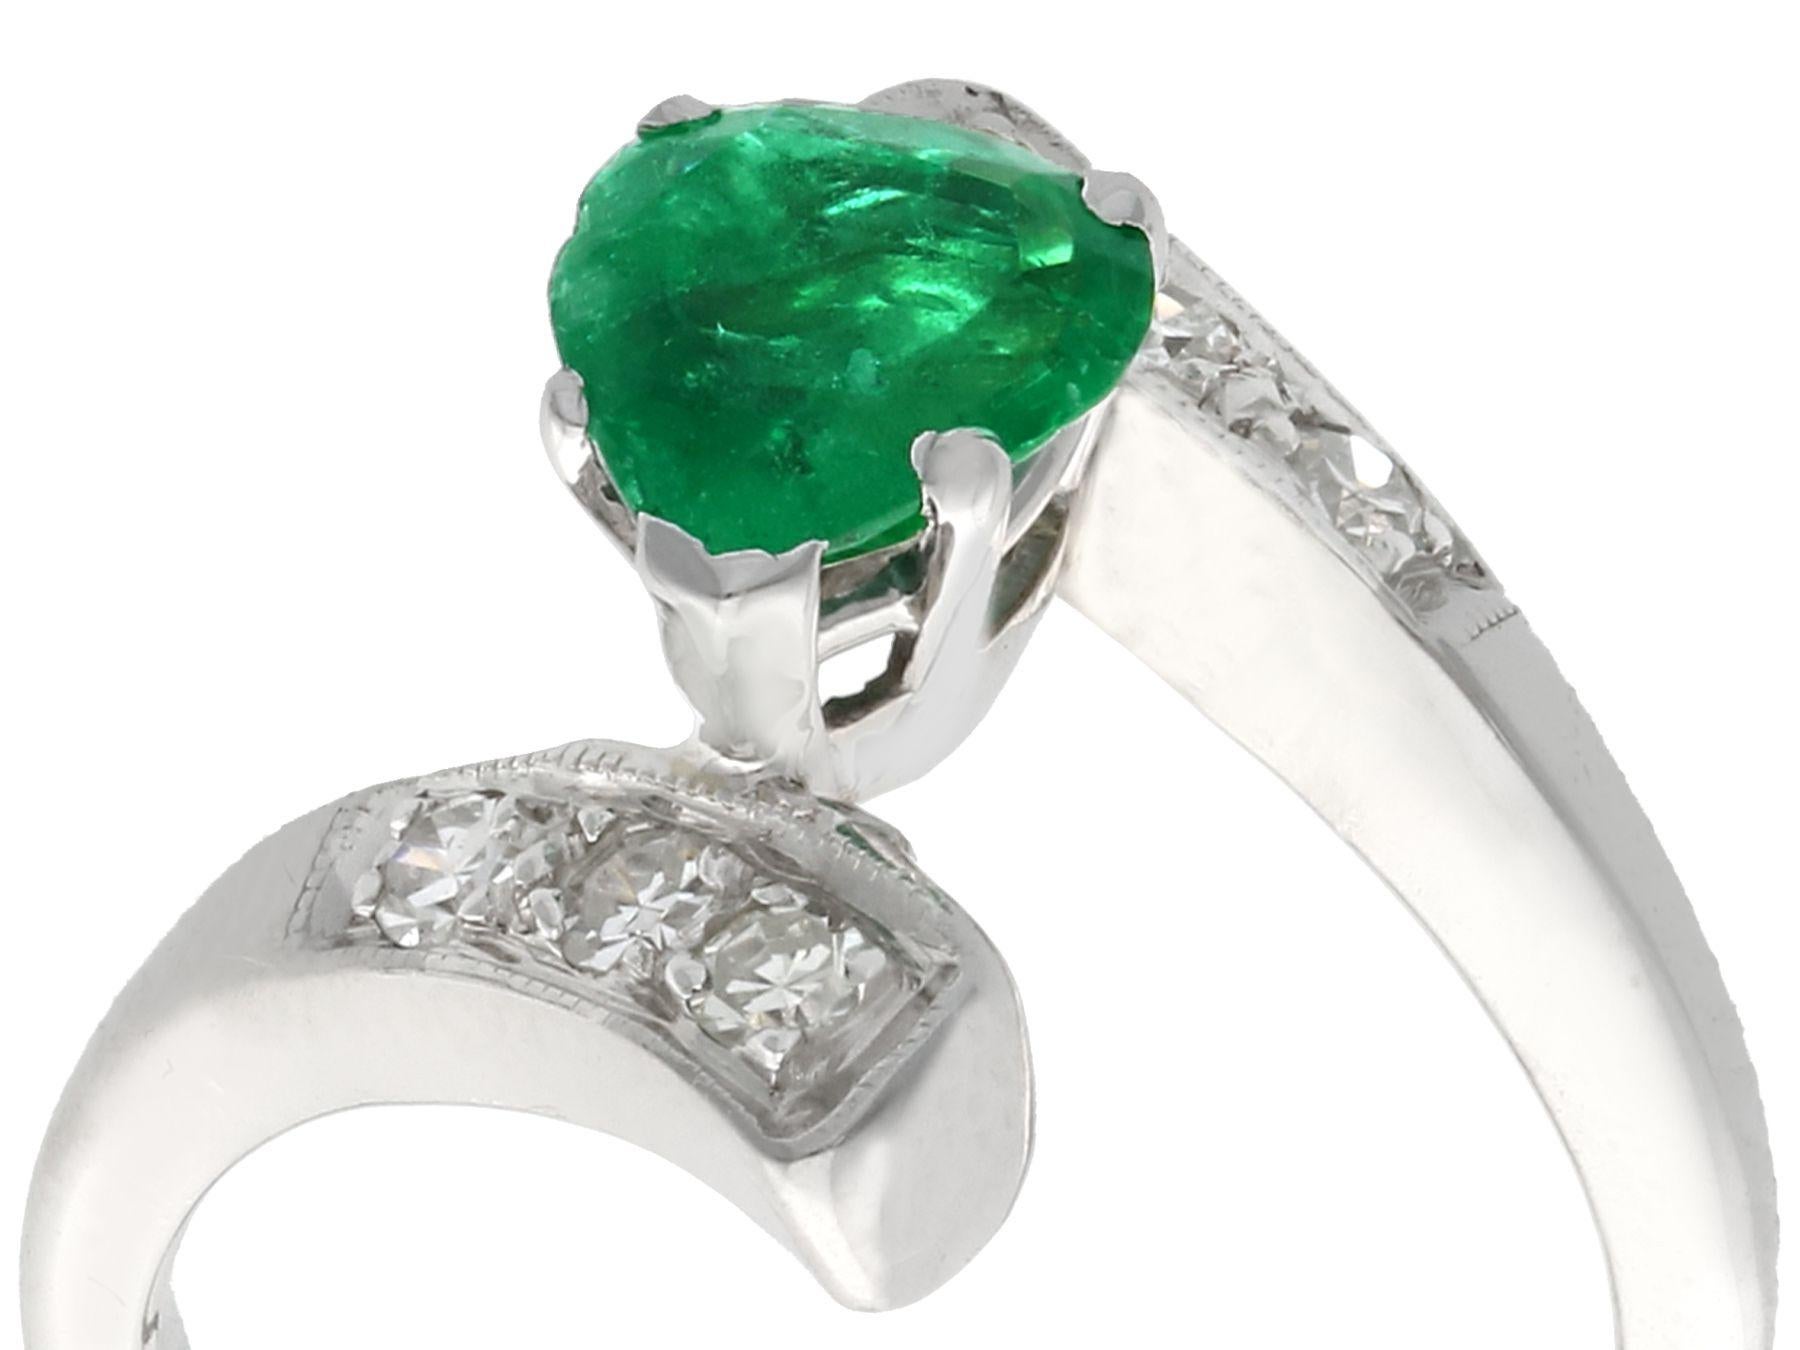 An impressive vintage 1950's 0.89 carat emerald and 0.24 carat diamond platinum twist style dress ring; part of our diverse antique  estate jewelry collections.

This fine and impressive pear cut emerald and diamond ring has been crafted in